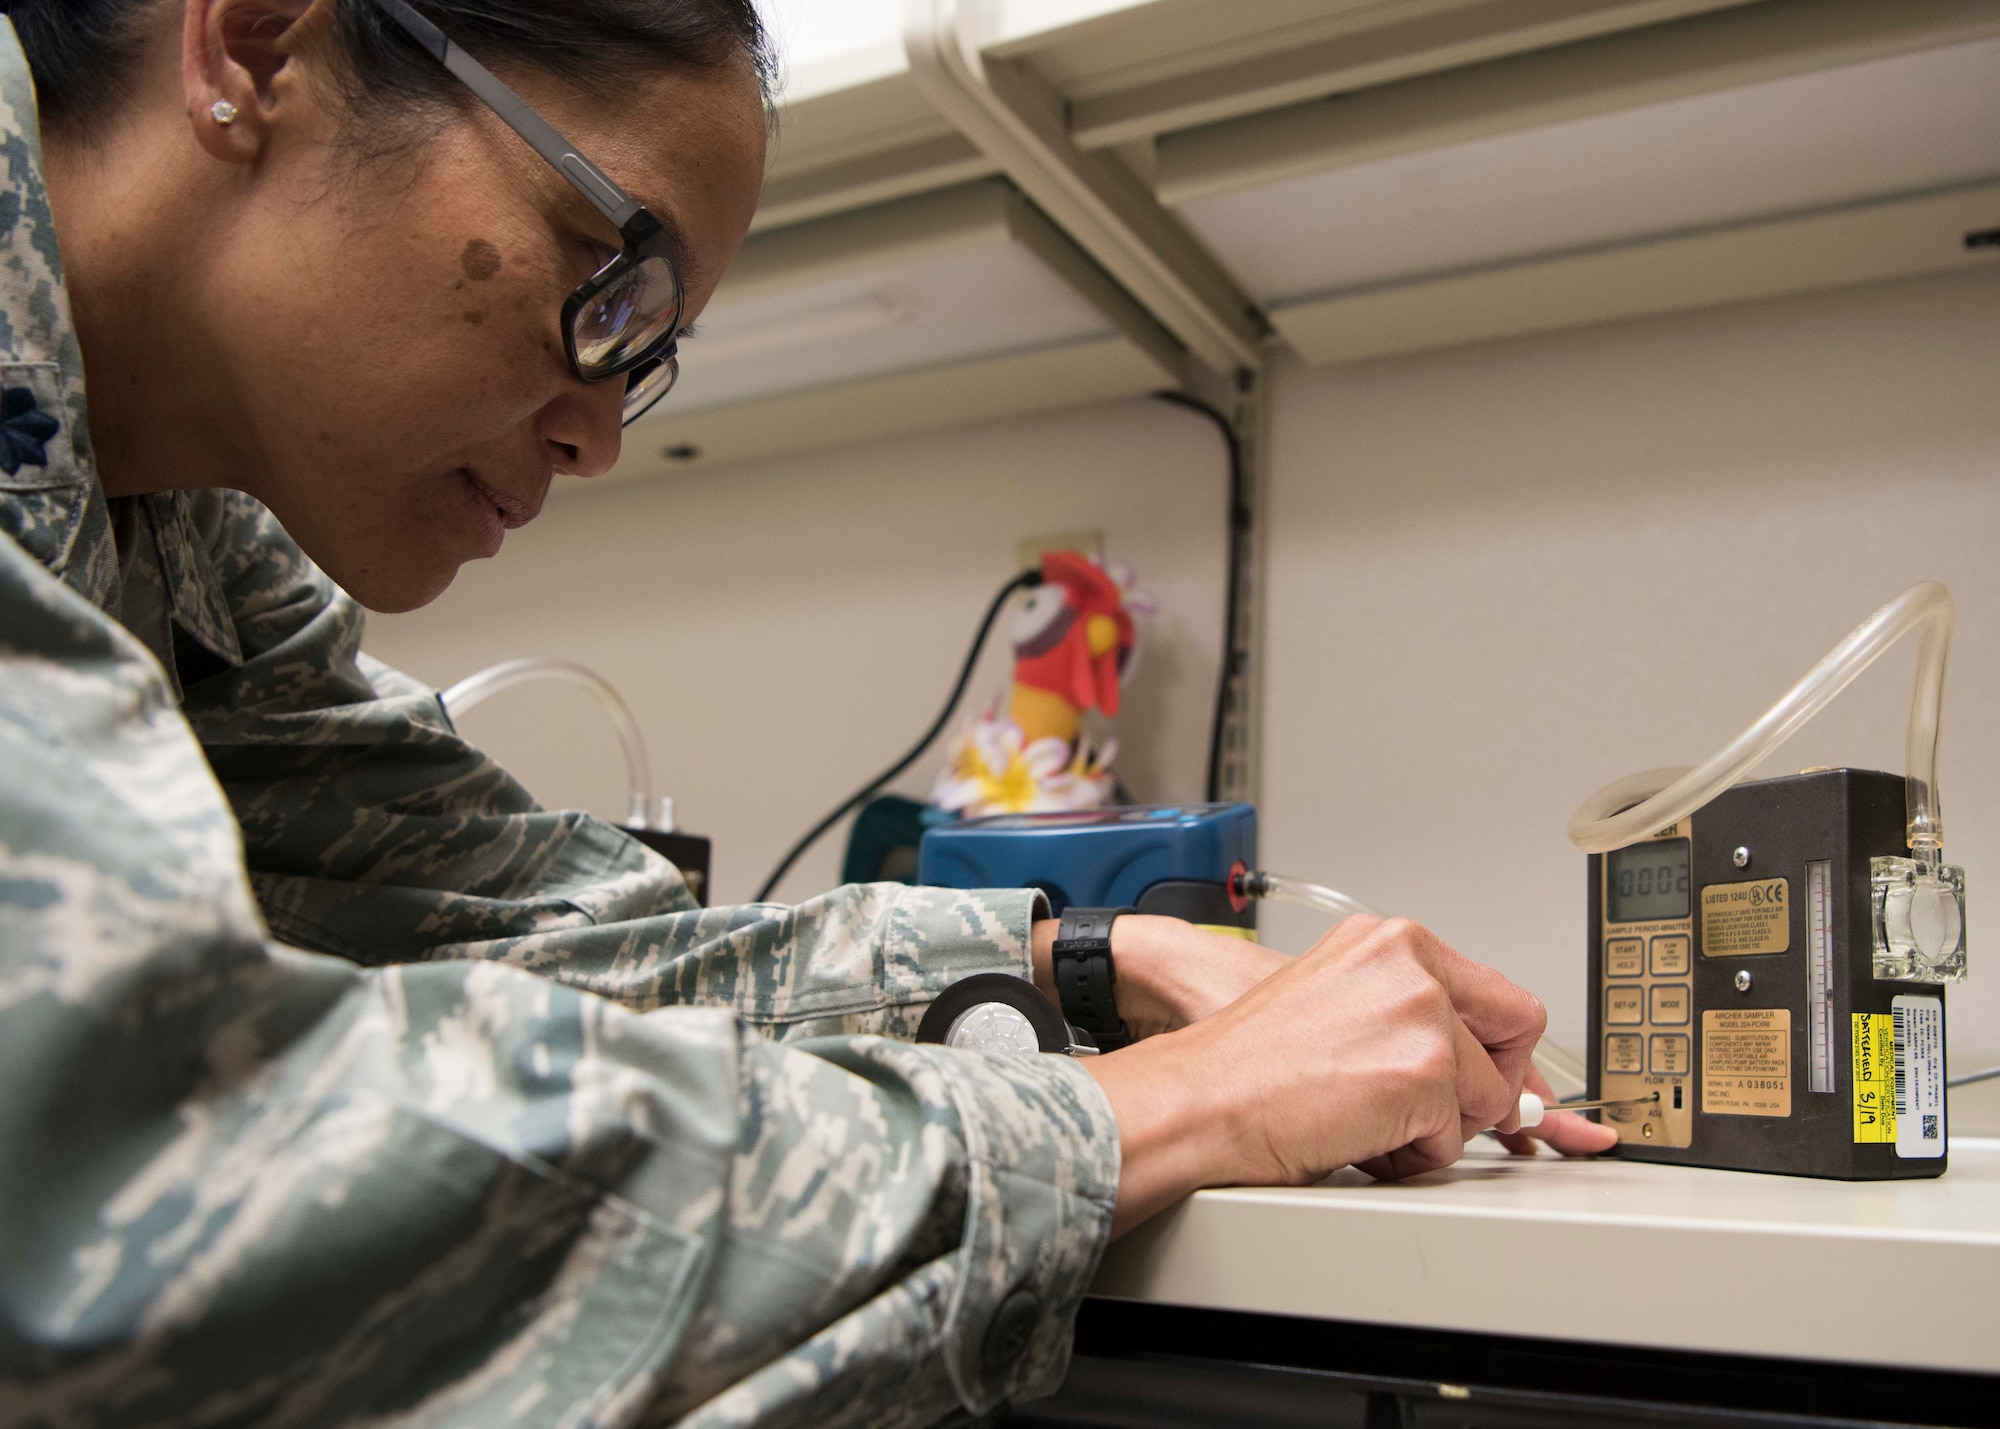 Lt. Col. Elisa Hammer, 49th Medical Group Biomedical Engineering flight commander, calibrates an air pump, Jan. 11, 2019, on Holloman Air Force Base, N.M. Biomedical engineers use air pumps to sample particulates in the air in various work places in an effort to find potentially hazardous contamination. (U.S. Air Force photo by Staff Sgt. BreeAnn Sachs)